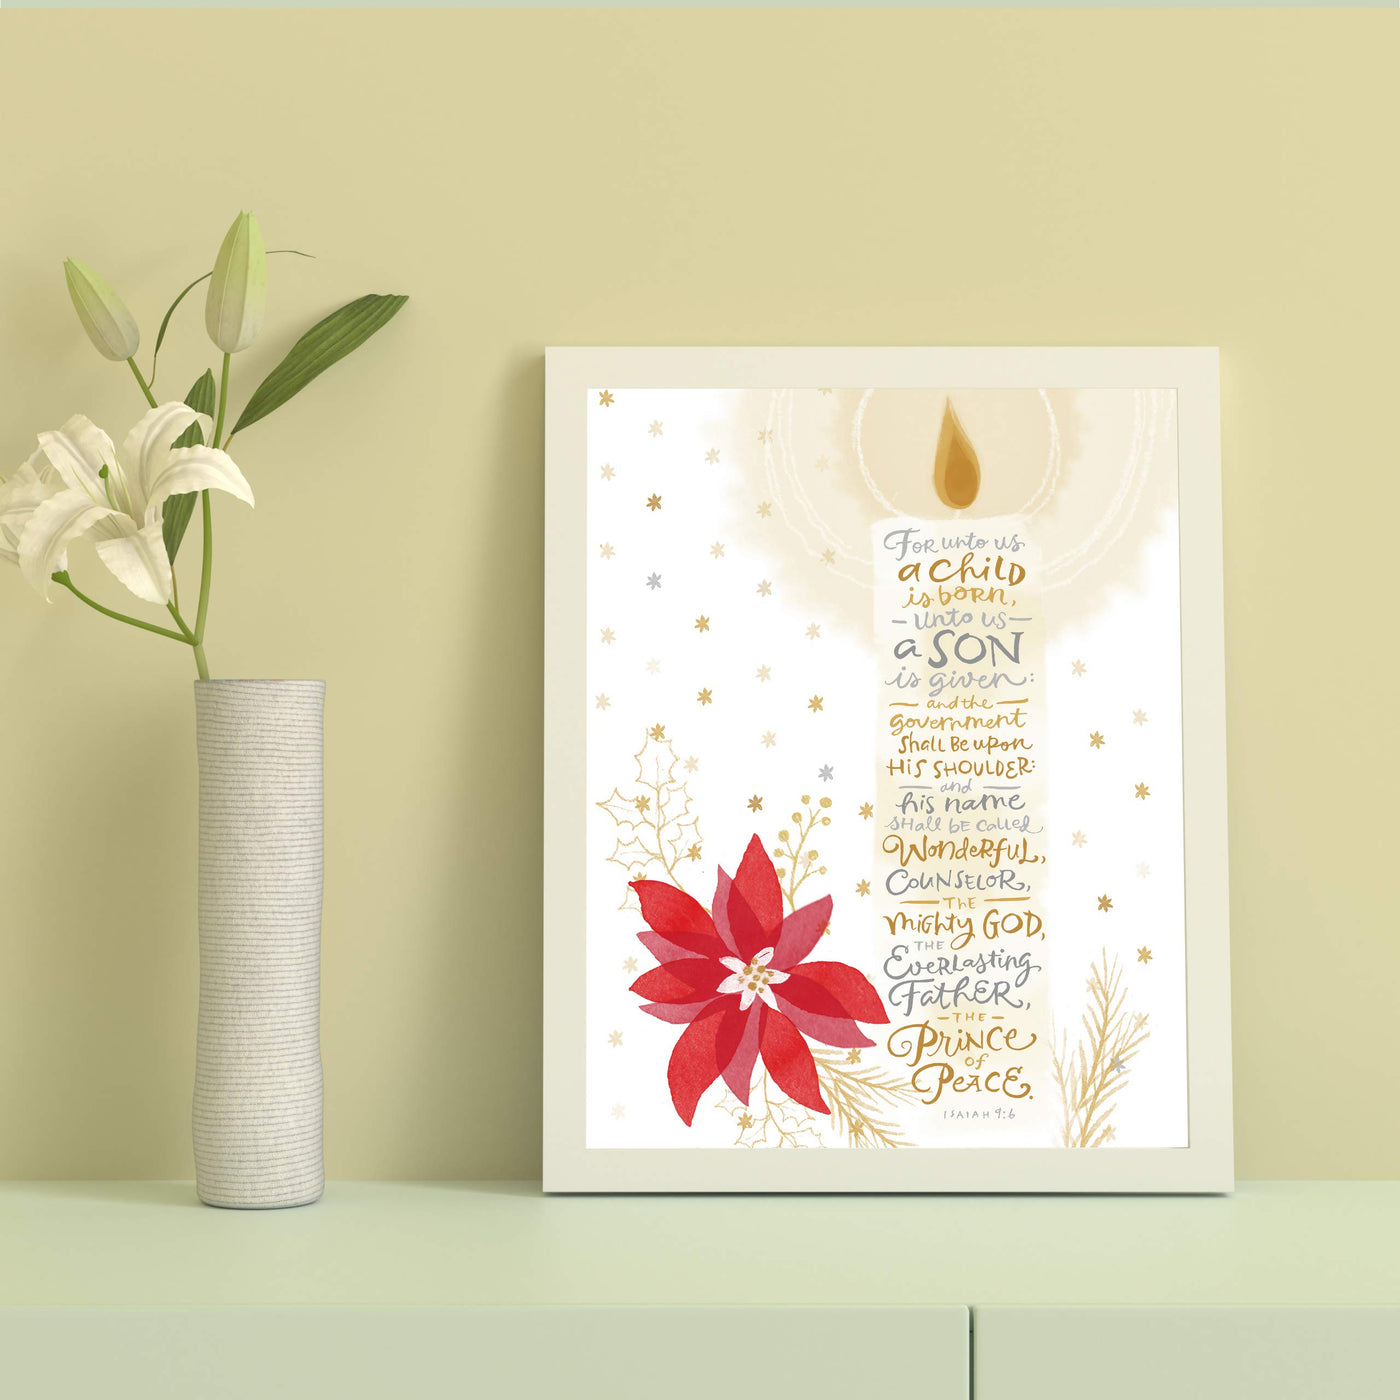 ?For Unto Us a Child Is Born-The Prince of Peace? -Isaiah 9:6 -Bible Verse Wall Art-8 x 10" -Typographic Candle Design w/Poinsettia-Ready to Frame. Scripture Print Ideal for Home-Office-Church D?cor.